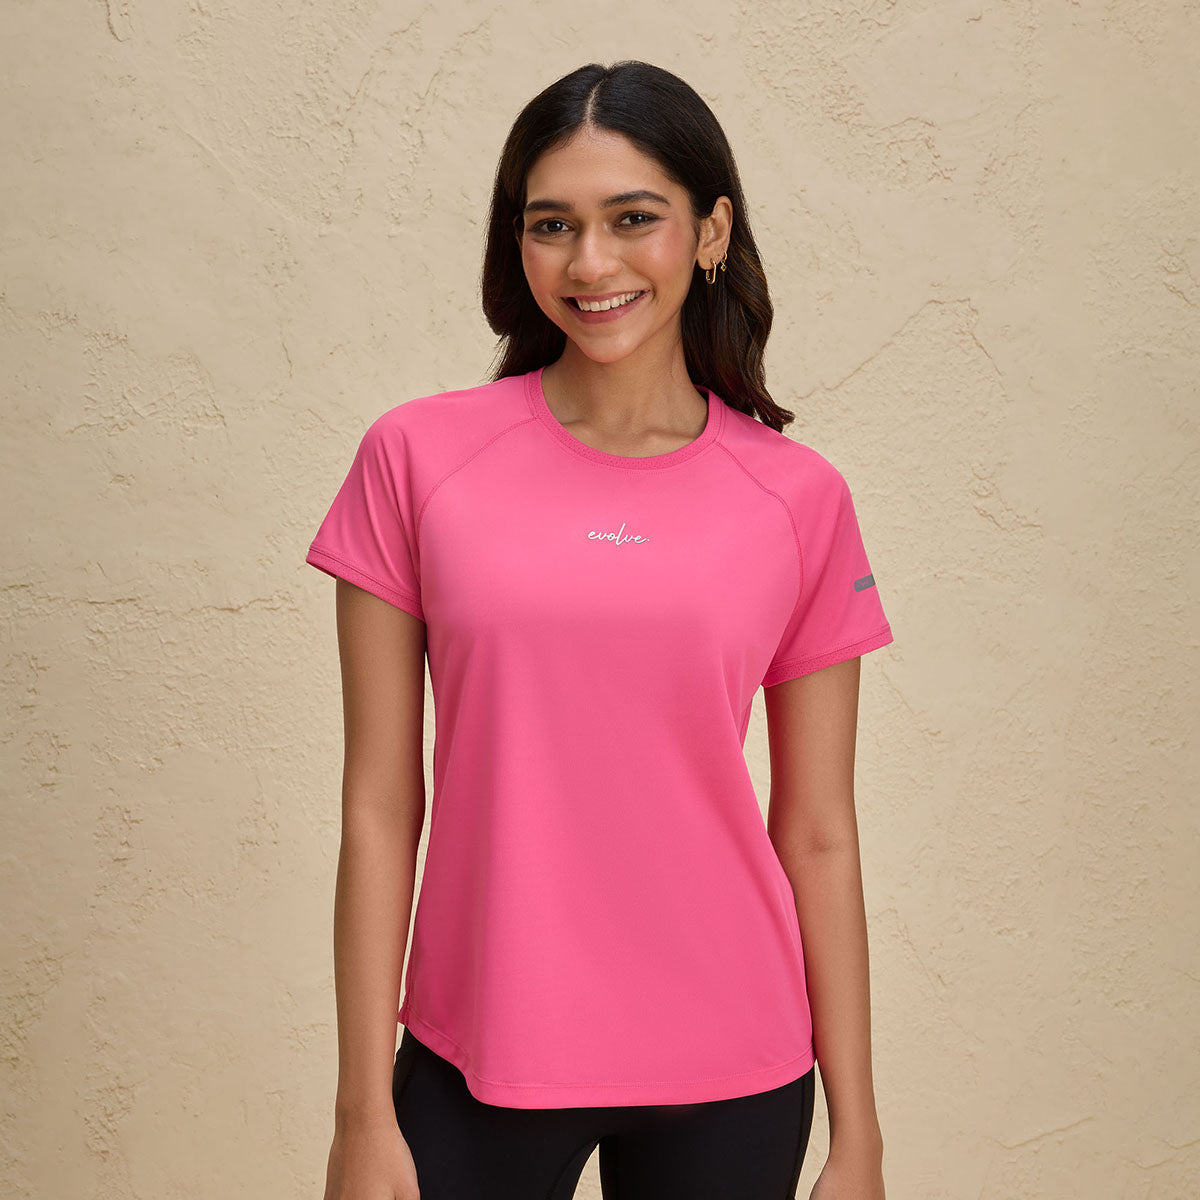 Nykd By Nykaa Half Sleeves Regular Fit Quick Dry Running Fitness Sports Tee-NYK033-Pink